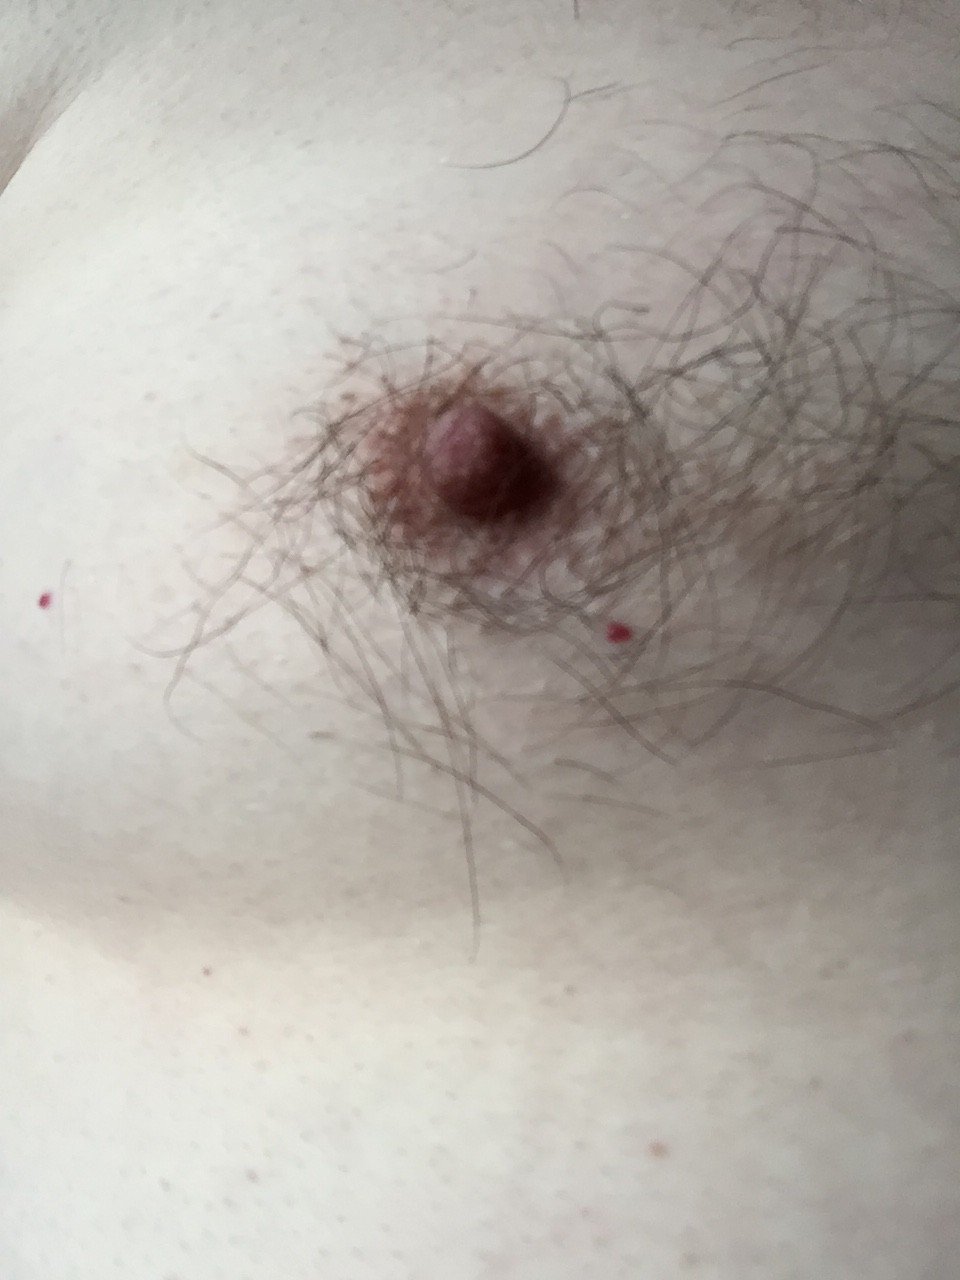 Photo by MrAlSouth with the username @MrAlSouth, who is a star user,  November 6, 2019 at 8:41 AM. The post is about the topic Hairy Man Nips. and the text says '#ManNips'